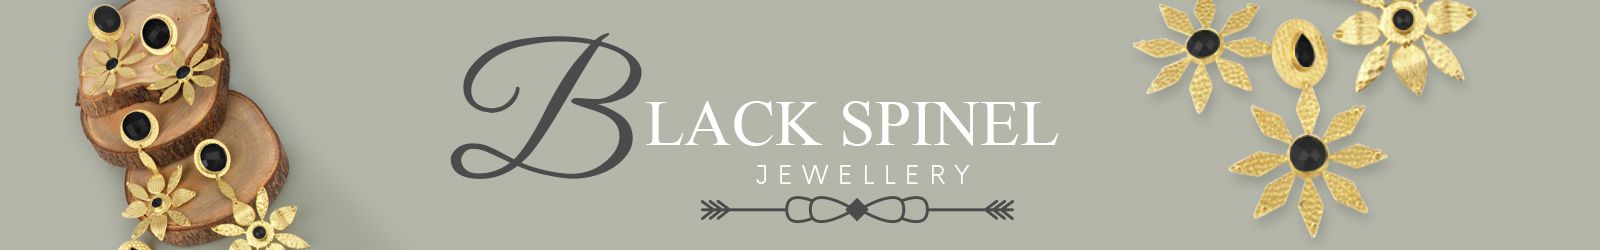 Silver Black Spinal Jewelry Wholesale Supplier